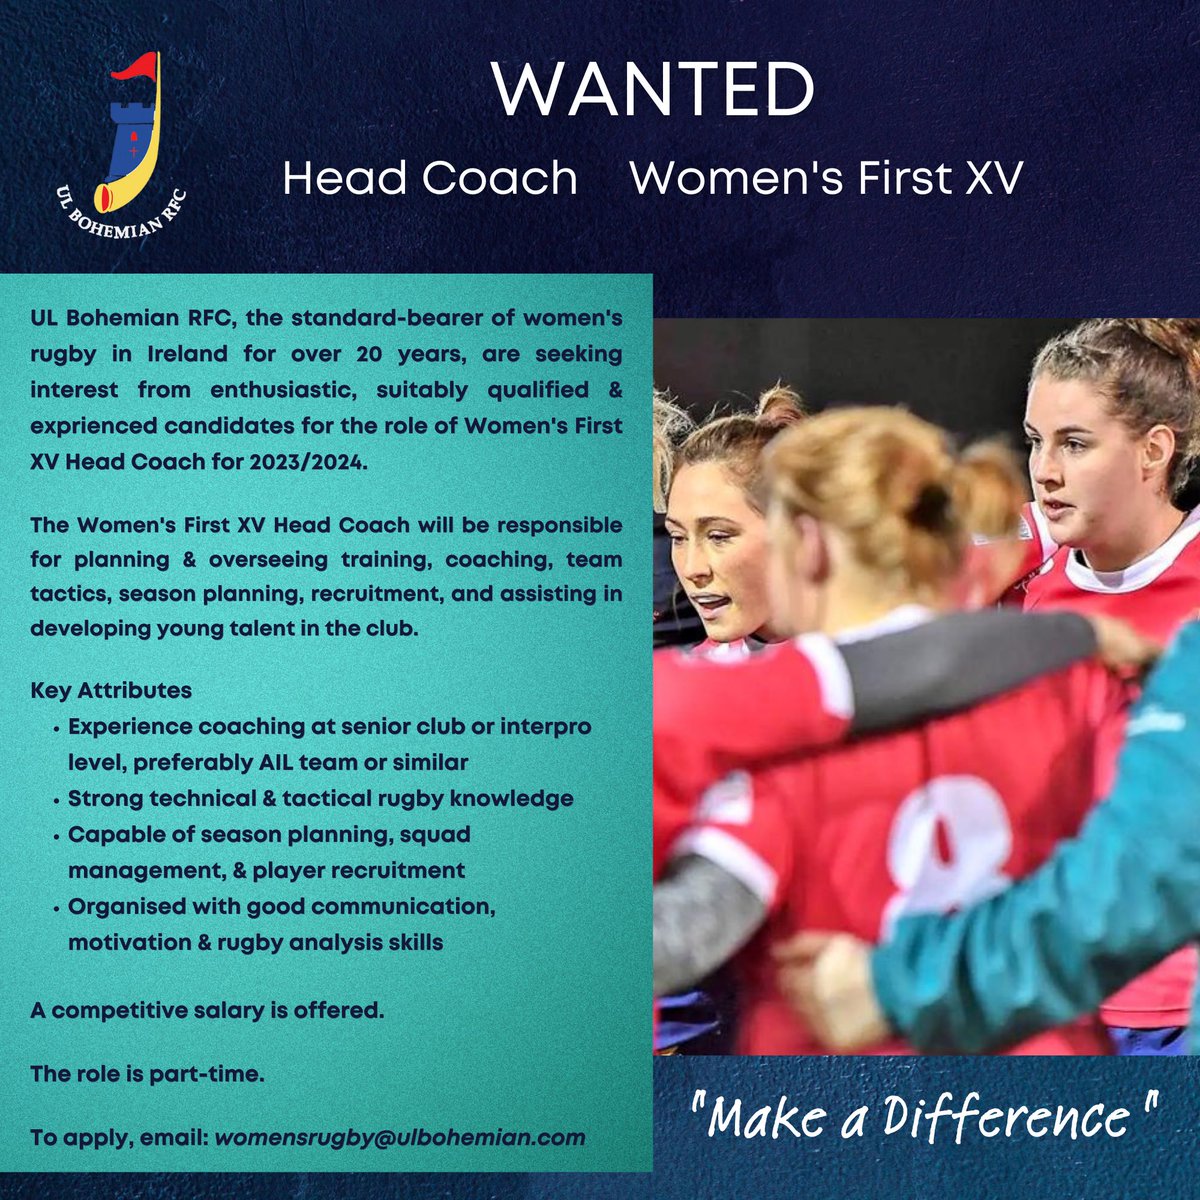 Exciting opportunity for an ambitious coach to lead Ireland’s most successful women’s rugby team👇 #NothingLikeIt 🔴🔵